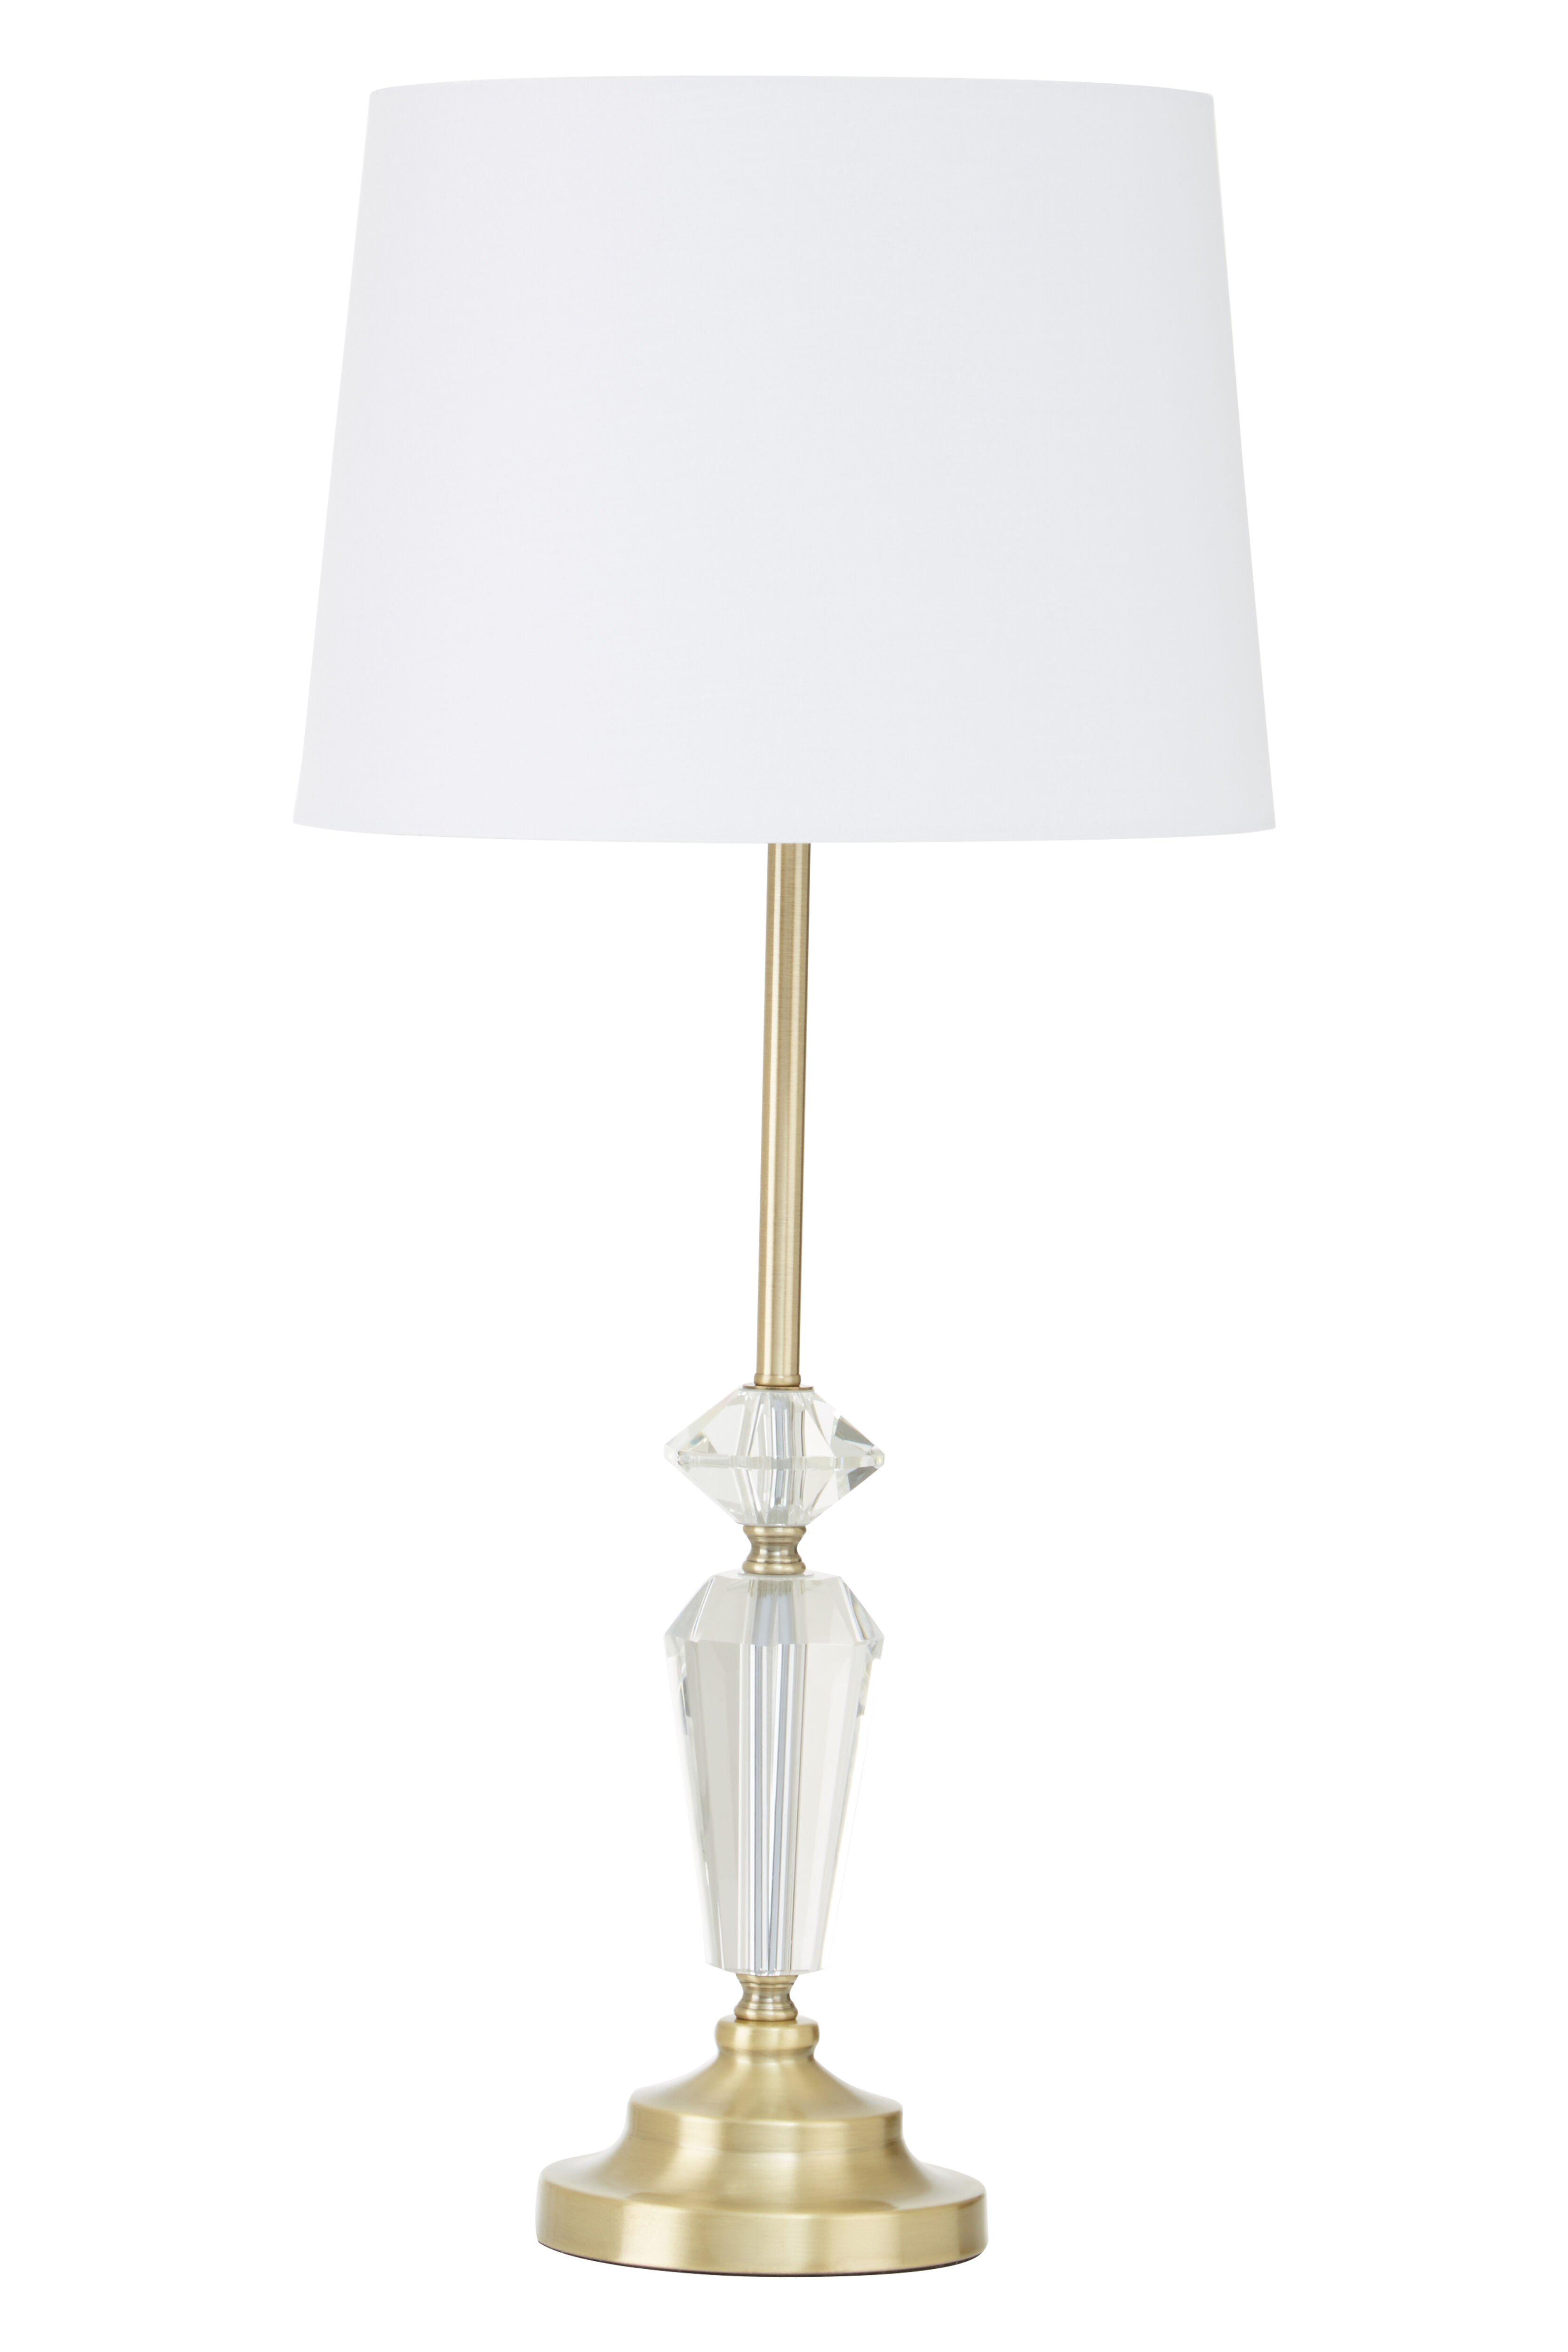 Interiors by Premier Hope Table Lamp